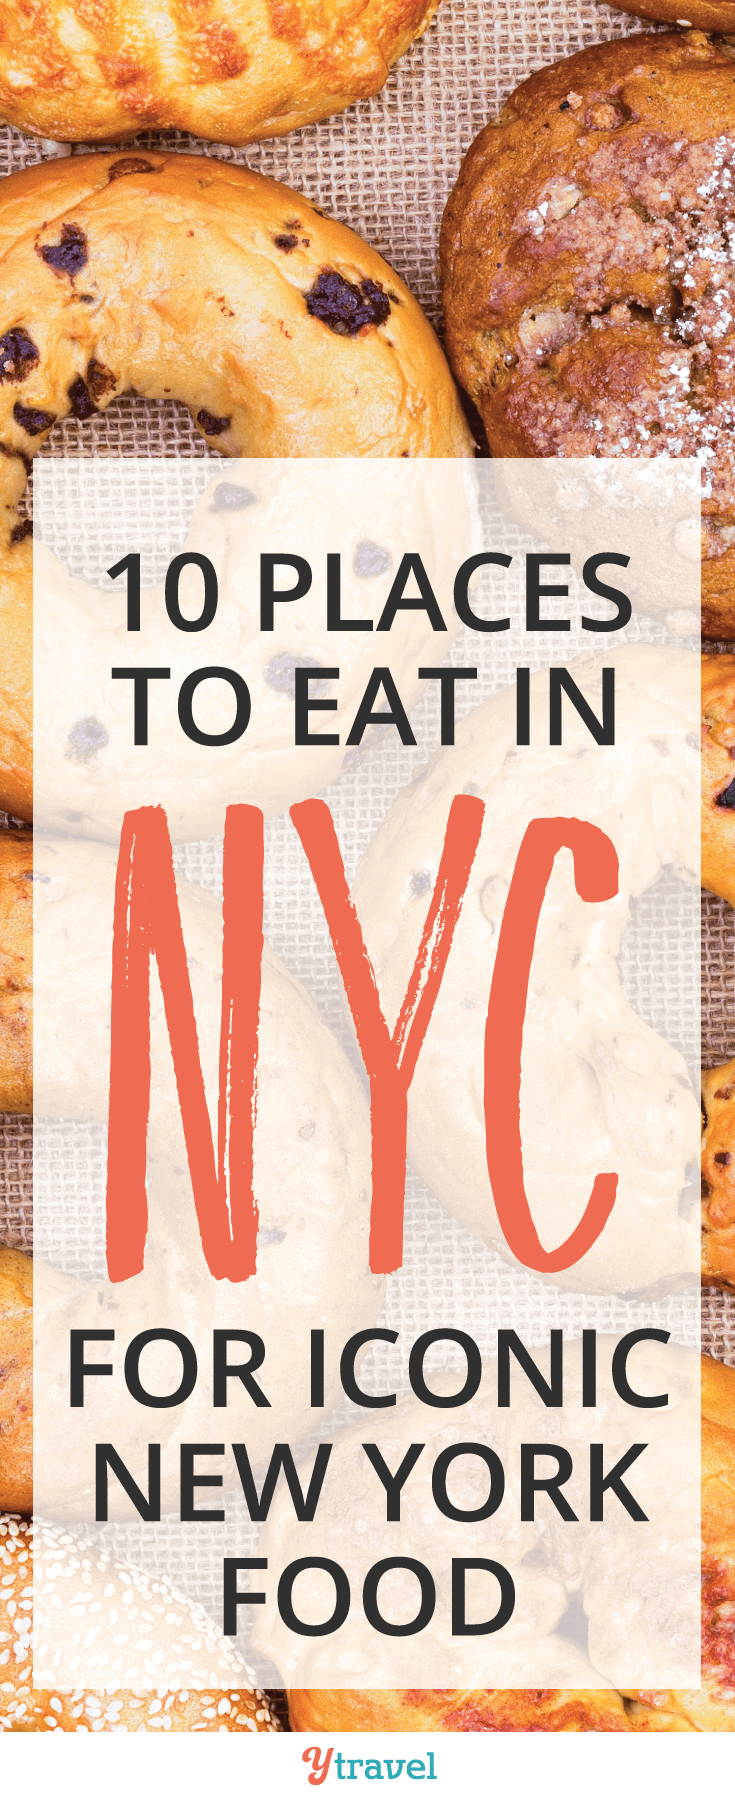 10 places to eat in NYC for iconic New York food. From pizza to bagels to rueben sandwiches we'll make sure you're stomach is satisfied!